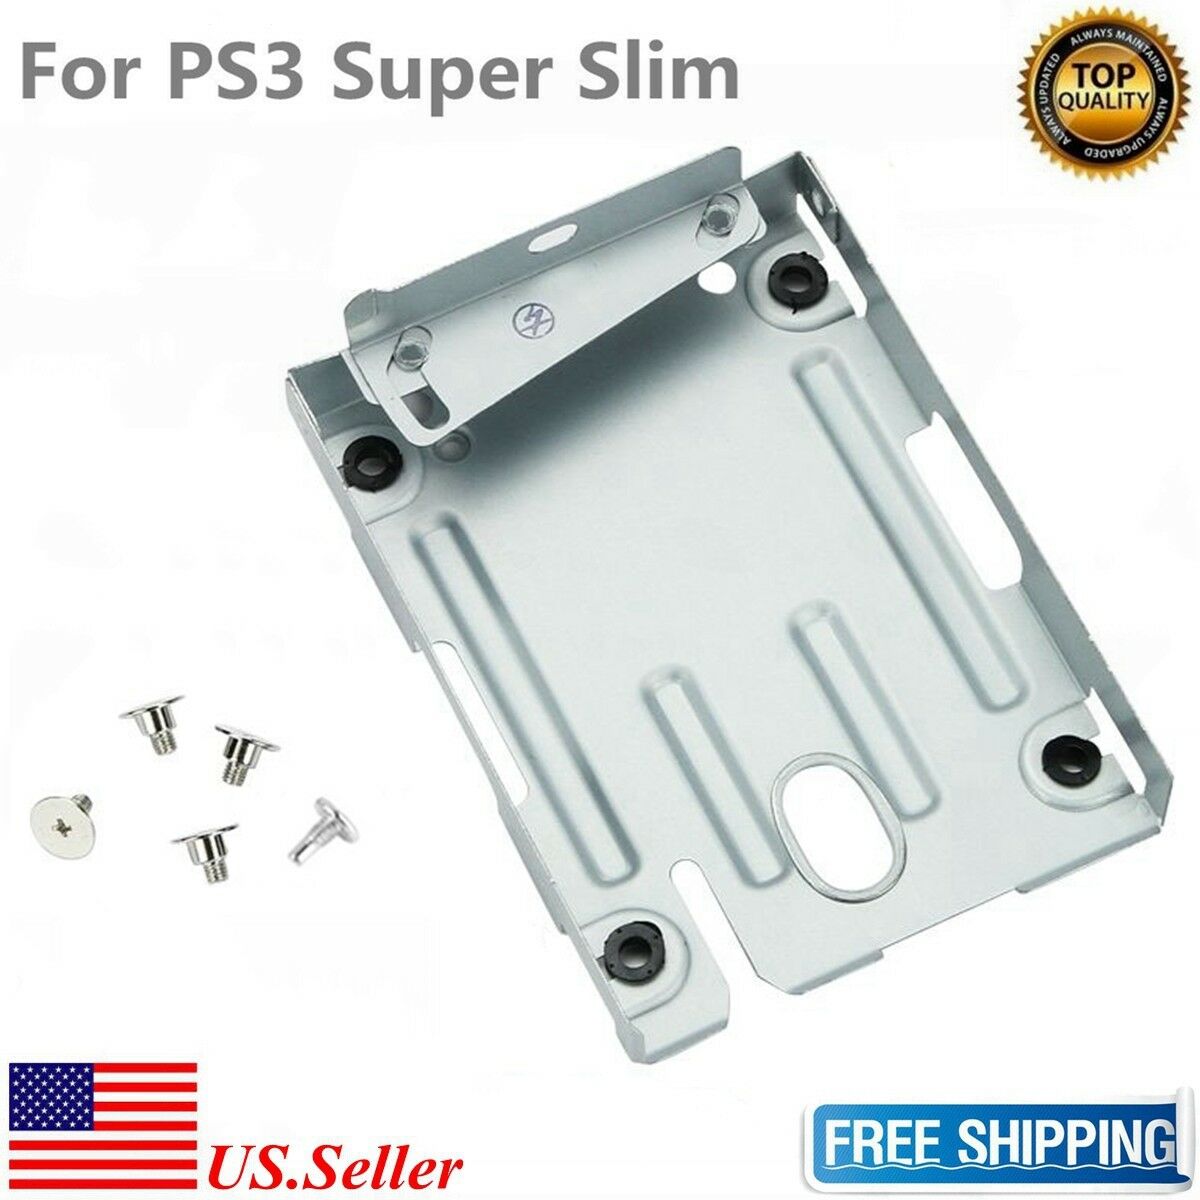 Sony Ps3 Super Slim Hard Disk Drive Hdd Mounting Bracket Caddy Cech-400x Series